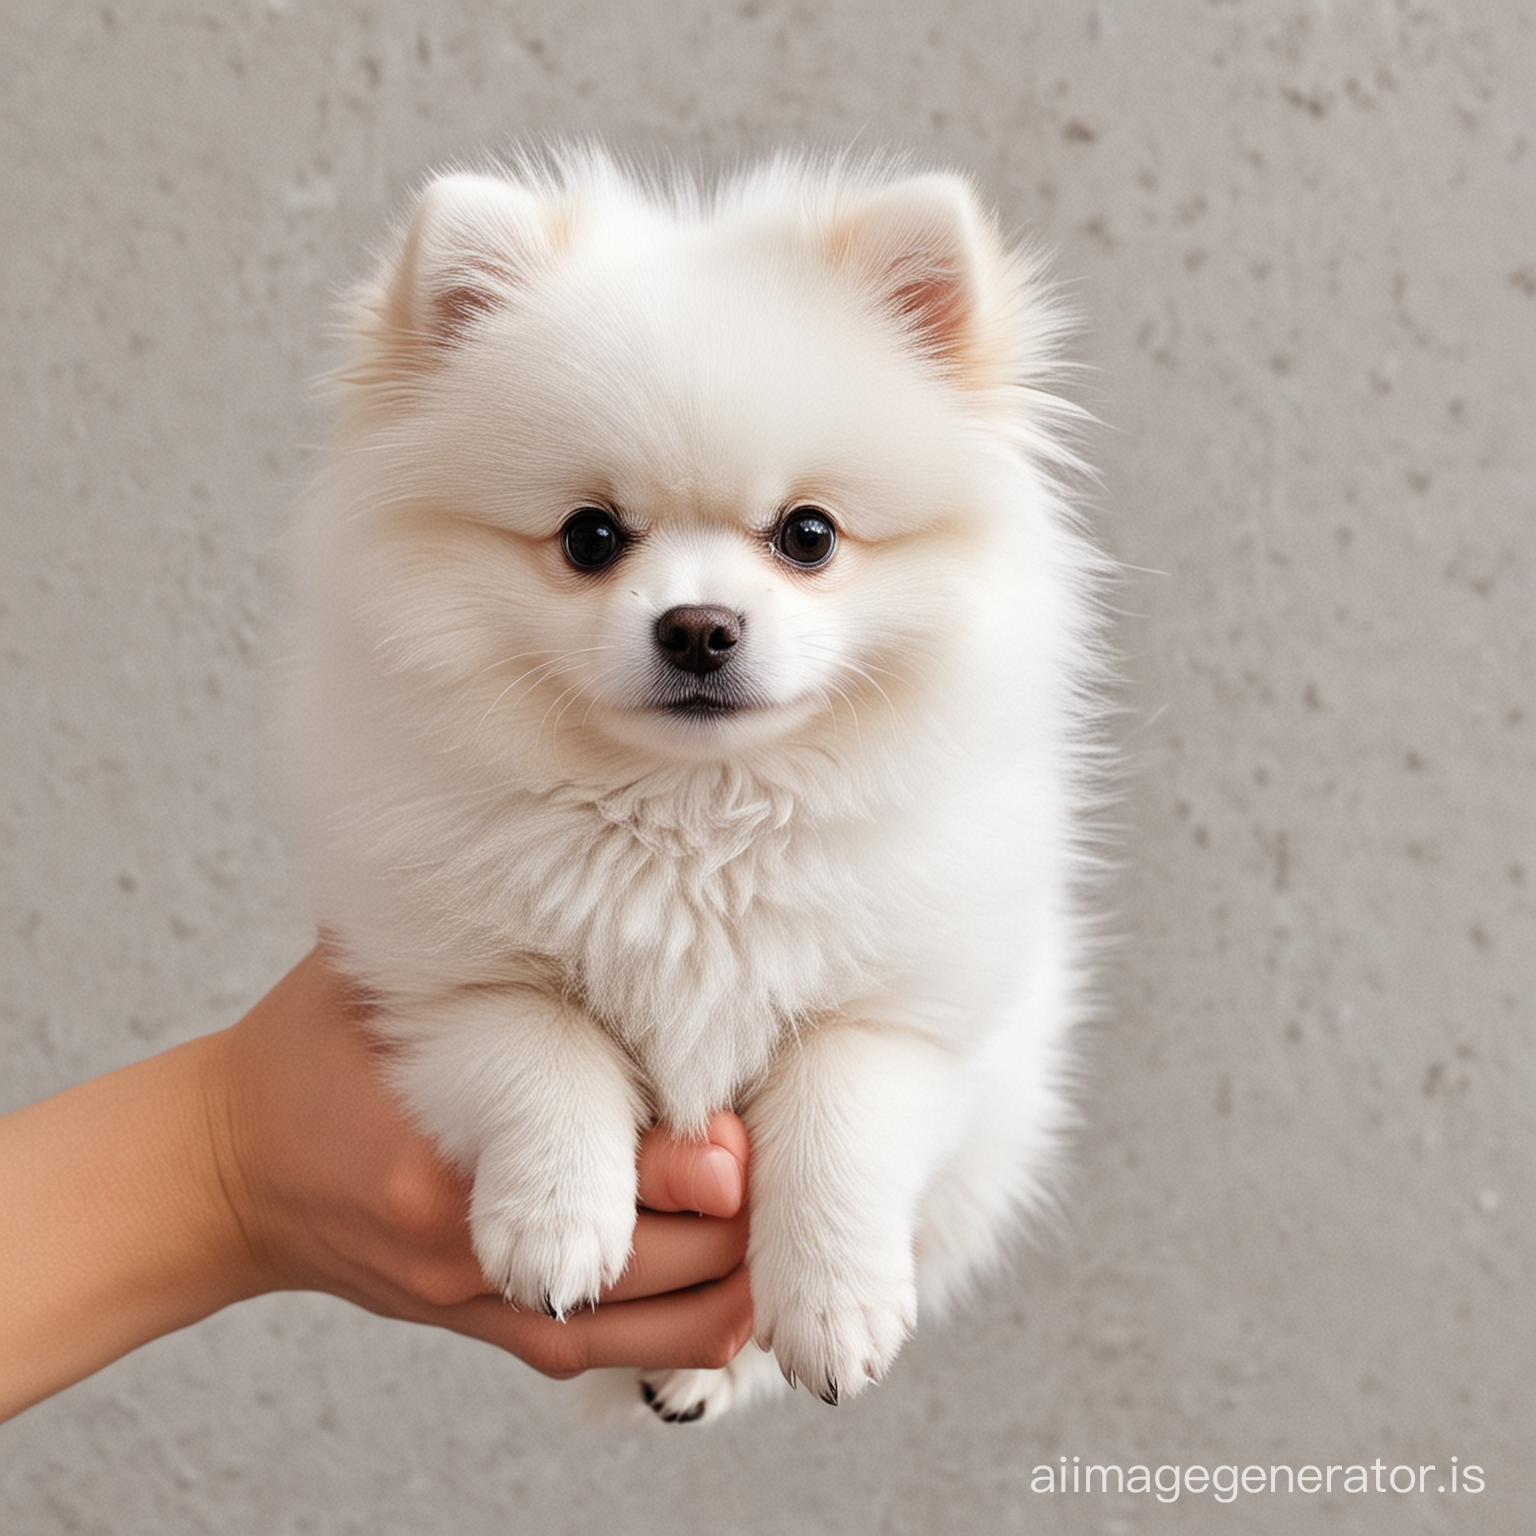 A cute and white Pomeranian dog in hand
